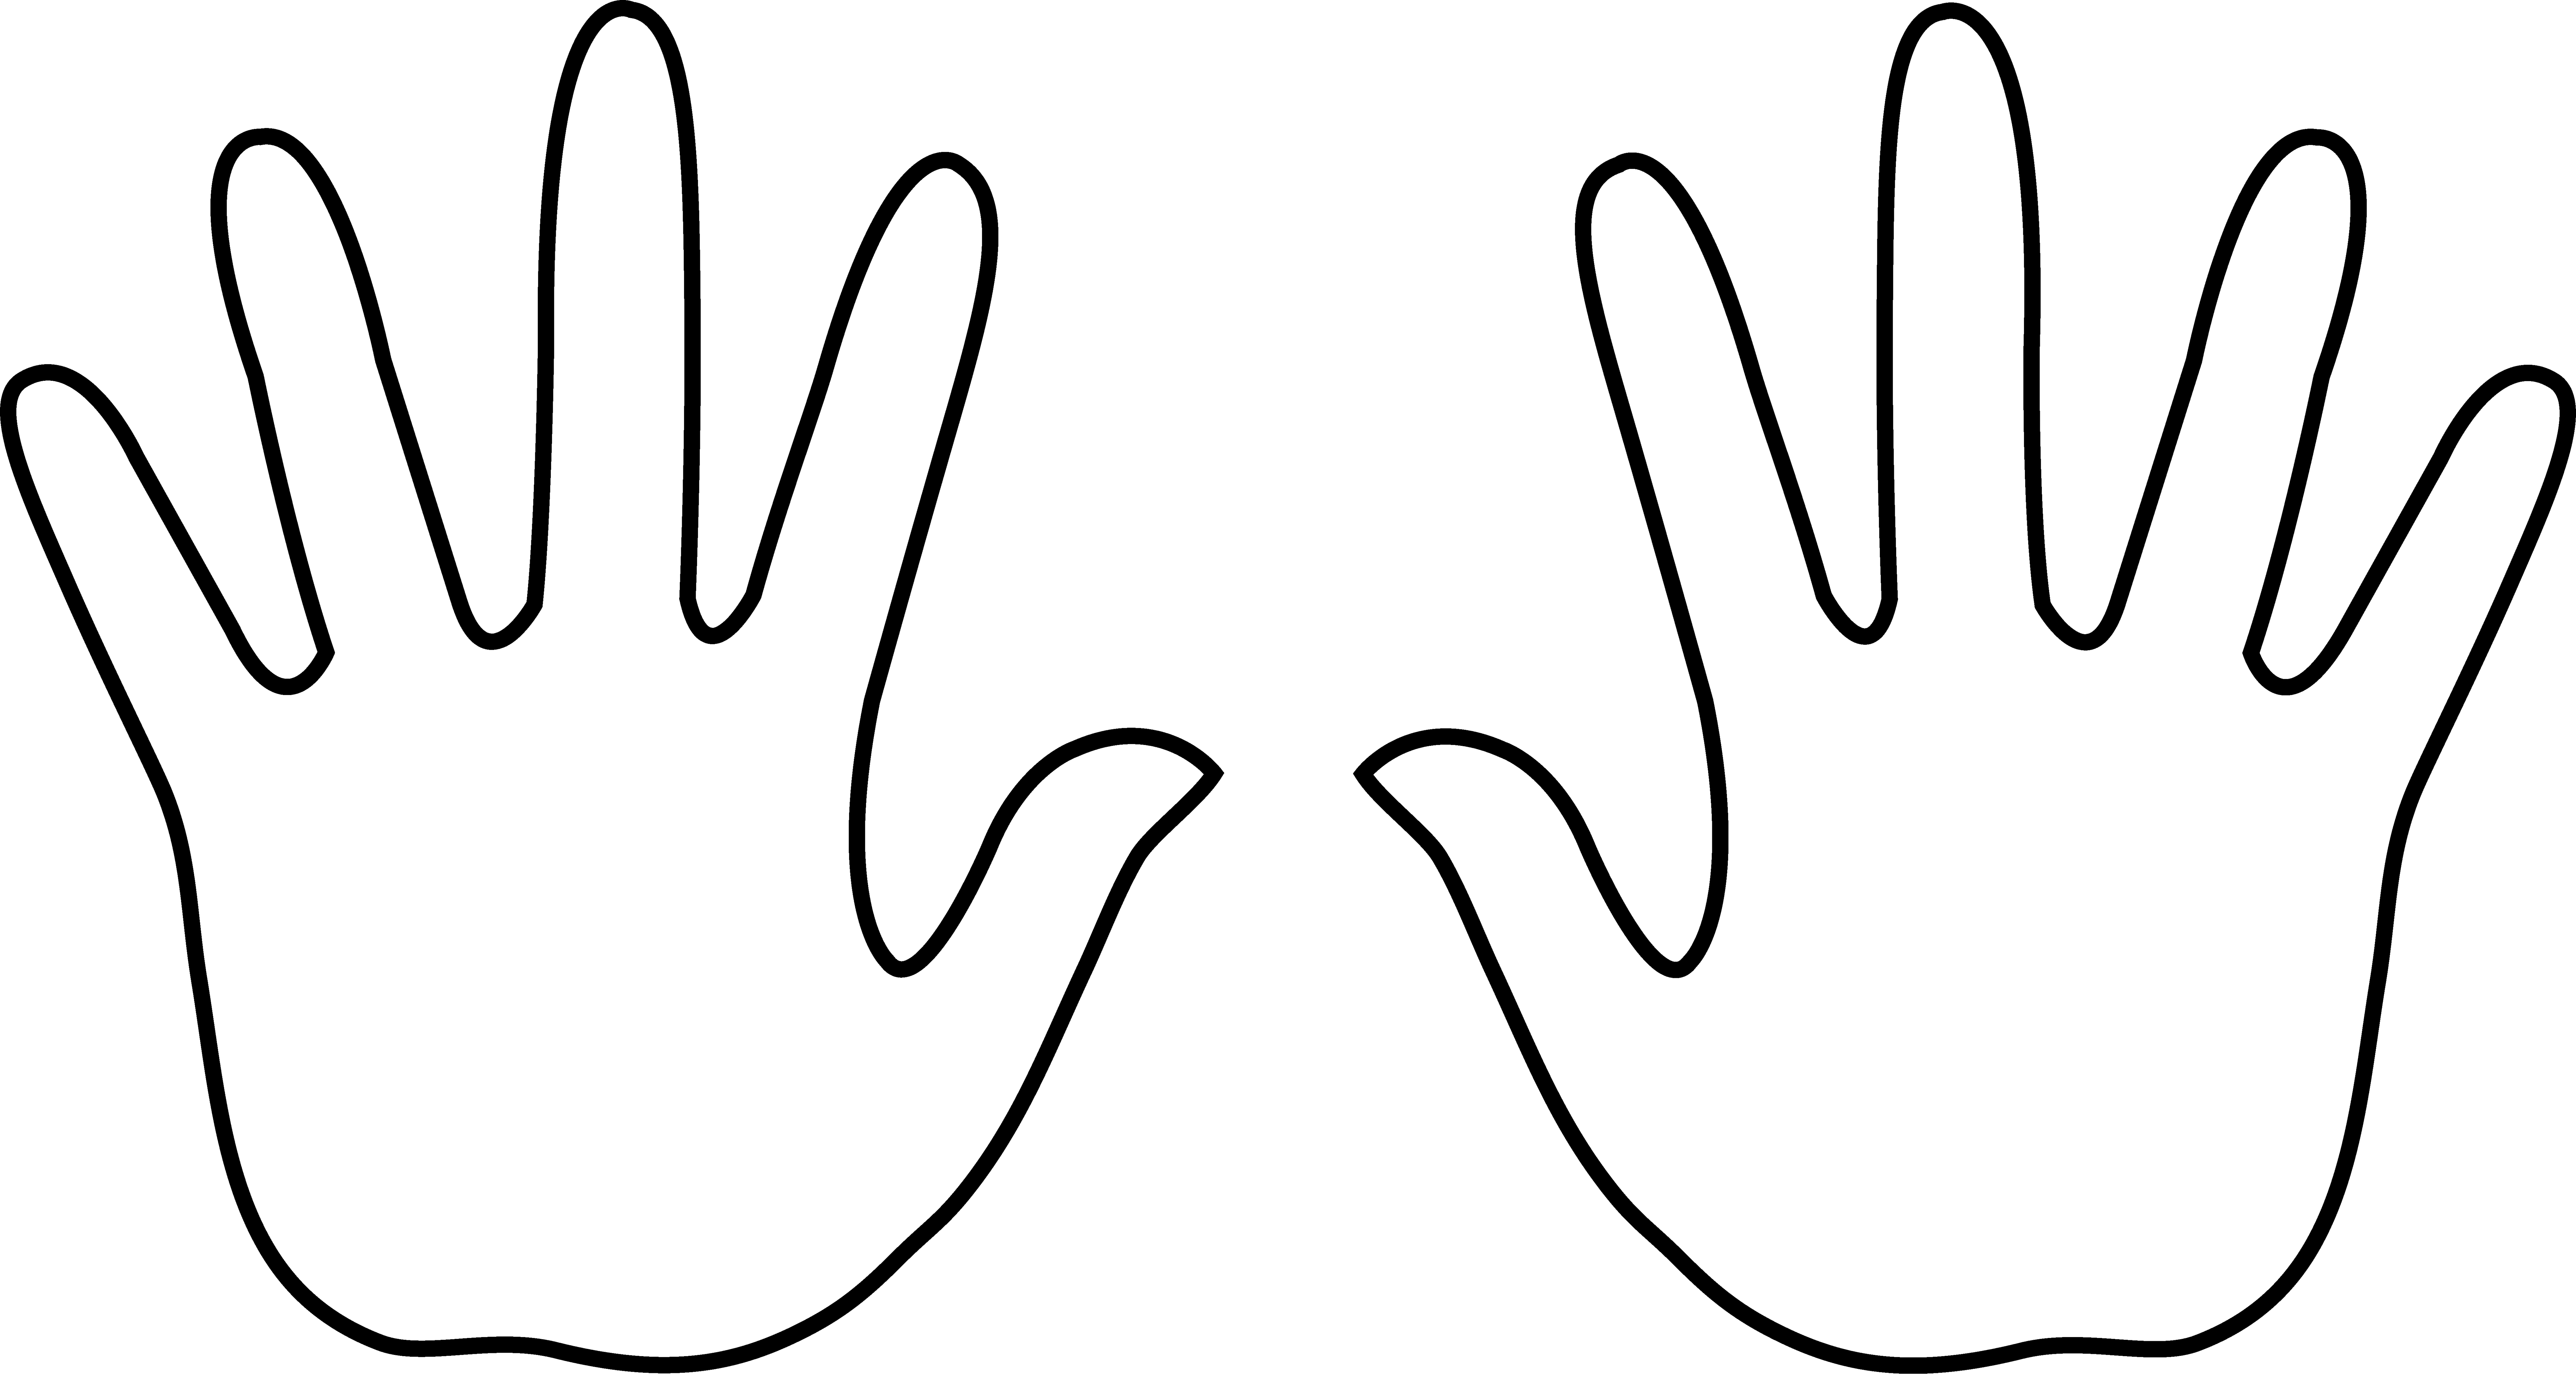 Left and png transparent. Finger clipart right hand